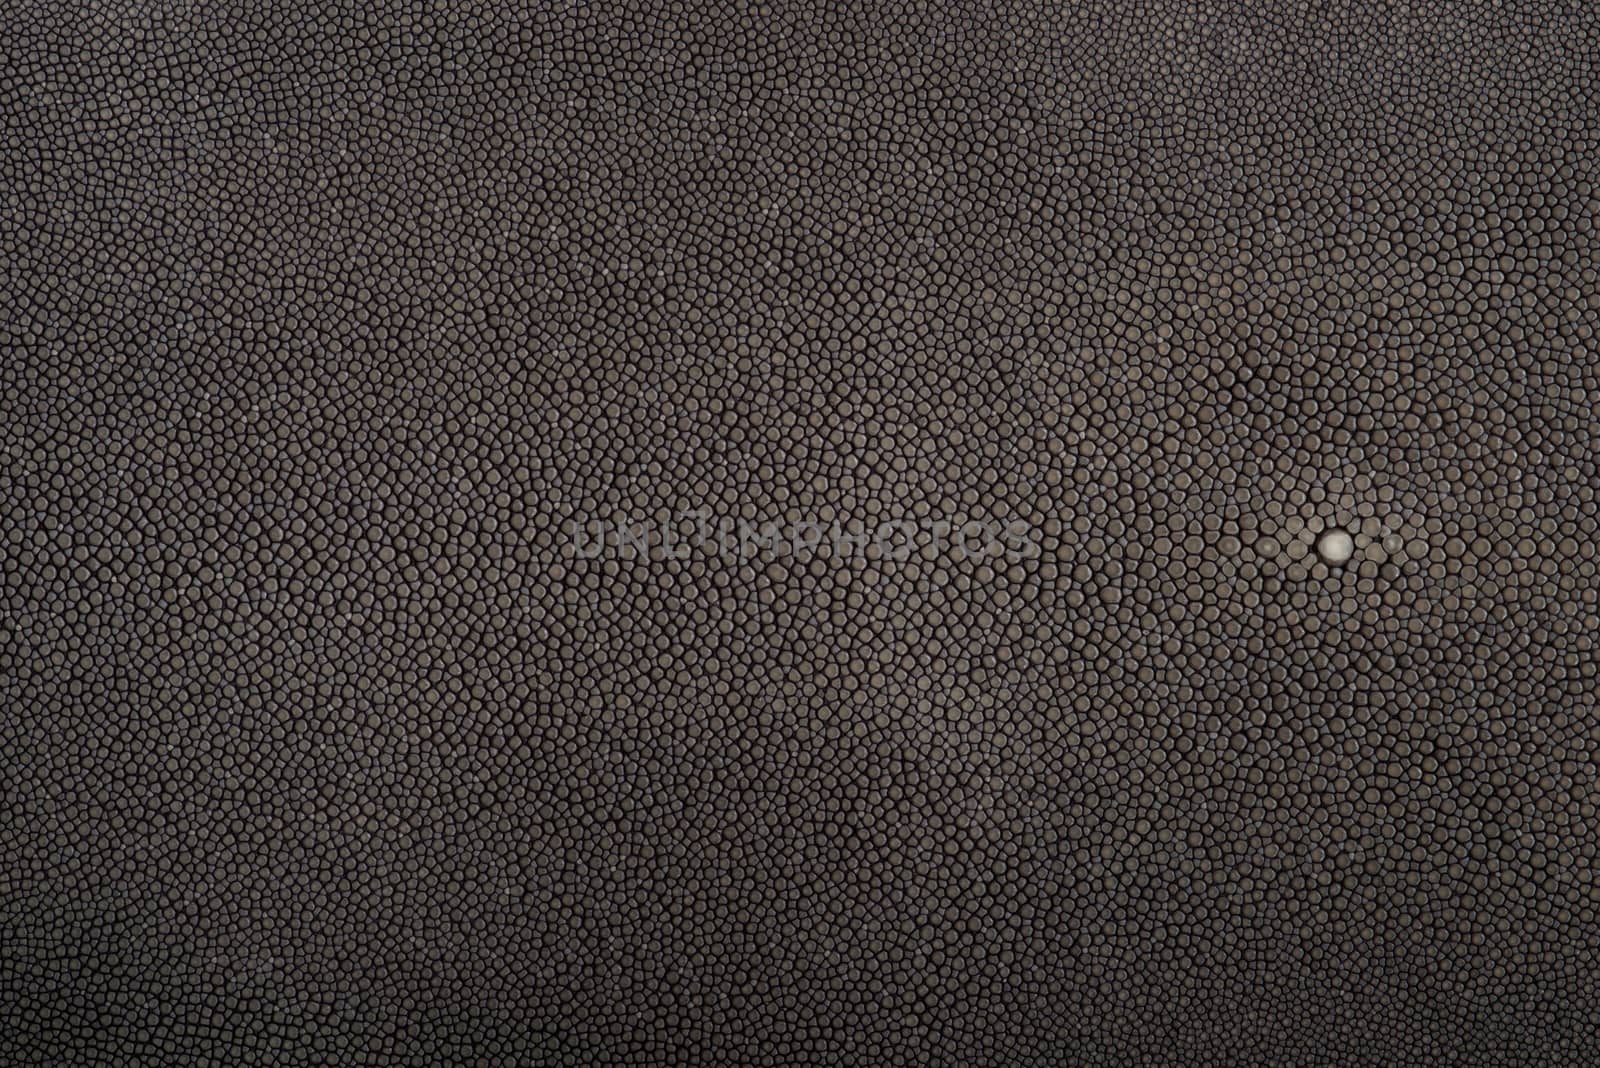 Stingray exotic fish leather, hide in steel color